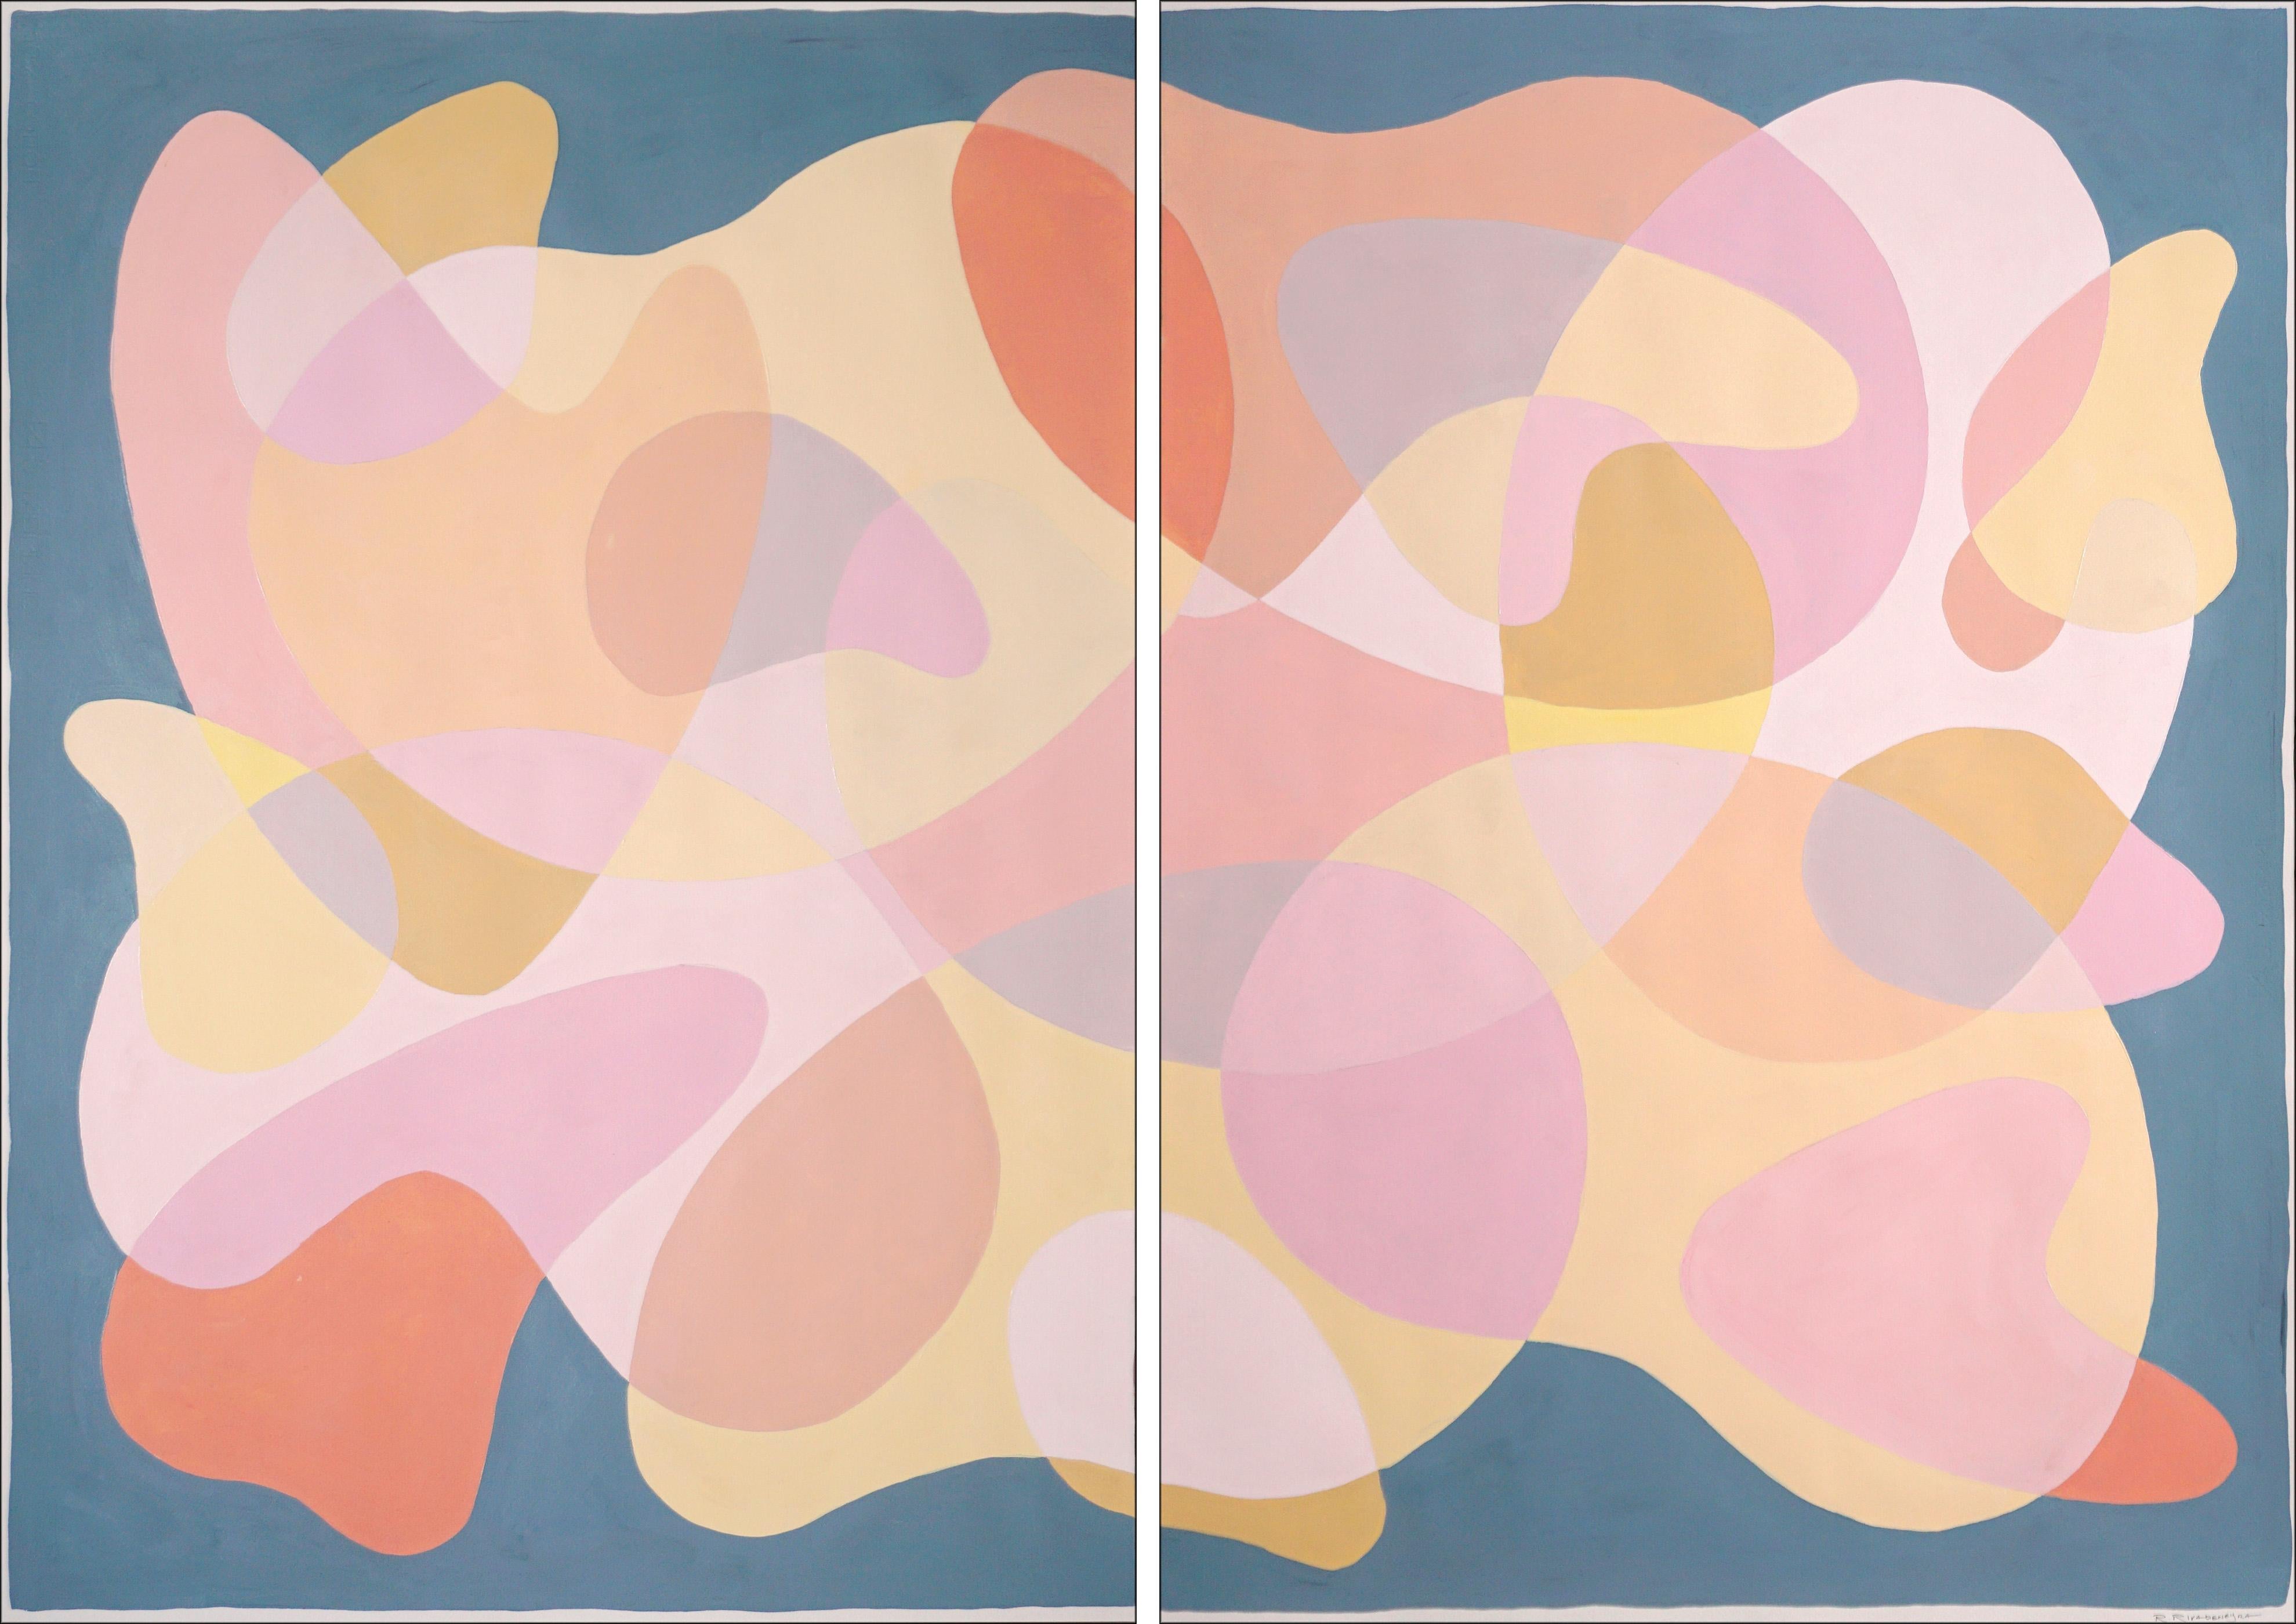 Spinning Naked Body, Nude Tones, Gray Diptych Mid-Century Shapes Transparencies 